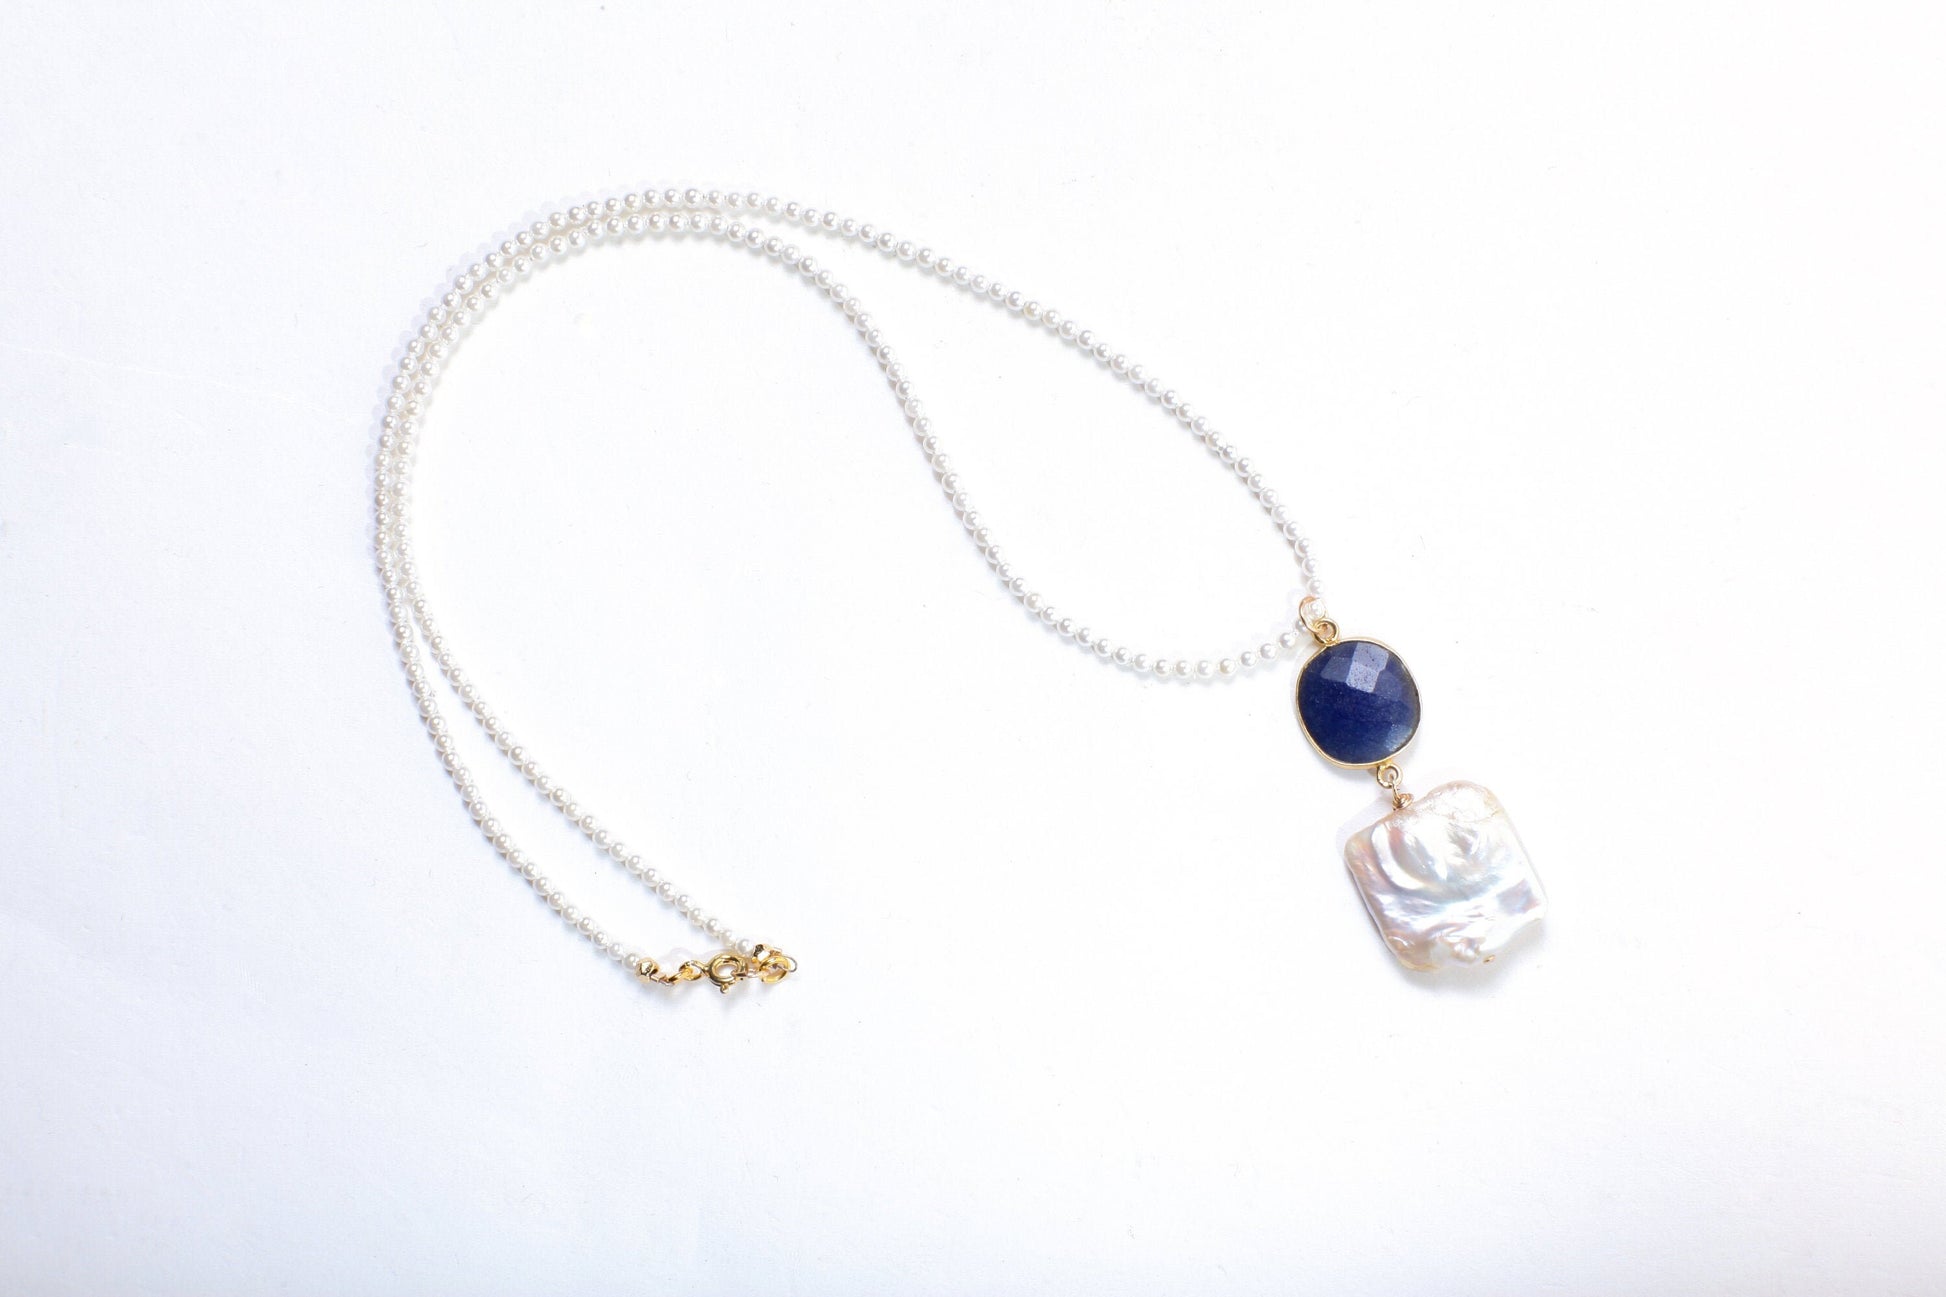 Baroque Pearl Necklace, Freshwater Square Baroque Pearl, Blue Sapphire Gold Bezel Pendant Pearl Gemstone Bridal, Bridesmaid 18" Necklace